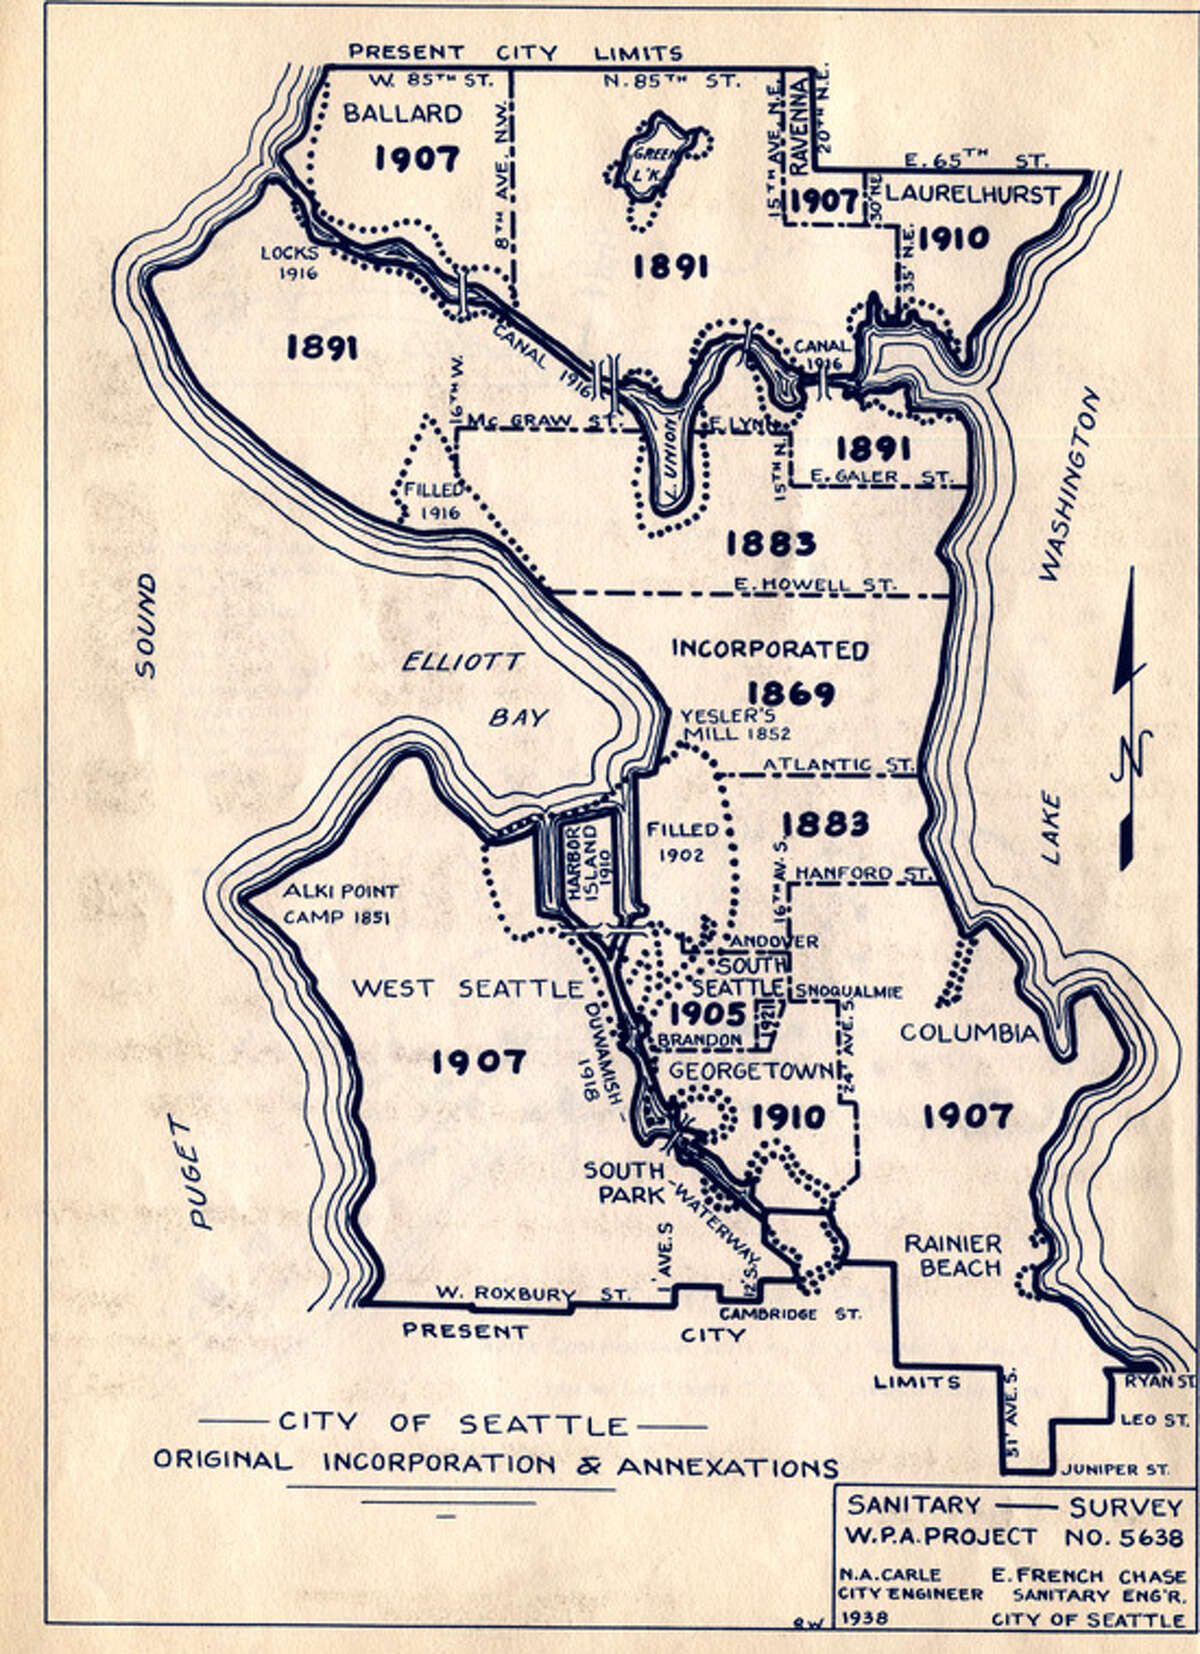 What were Seattle's earliest neighborhoods? It doesn't take a major sleuth to figure out some of it, but we consulted this 1938 Works Progress Administration map showing Seattle's annexations to date at that time to come up with a list of some accuracy. The exact beginnings of some neighborhoods are hard to nail down, and the whole area was already inhabited by Native Americans long before even the earliest explorers sailed Puget Sound. We'll focus here on the parts of the city where the incoming white people opted to live and develop cities and neighborhoods. One note on this map, readers will notice that the northern boundary of the city was North 85th Street at that time, while it now extends to North 145th Street.